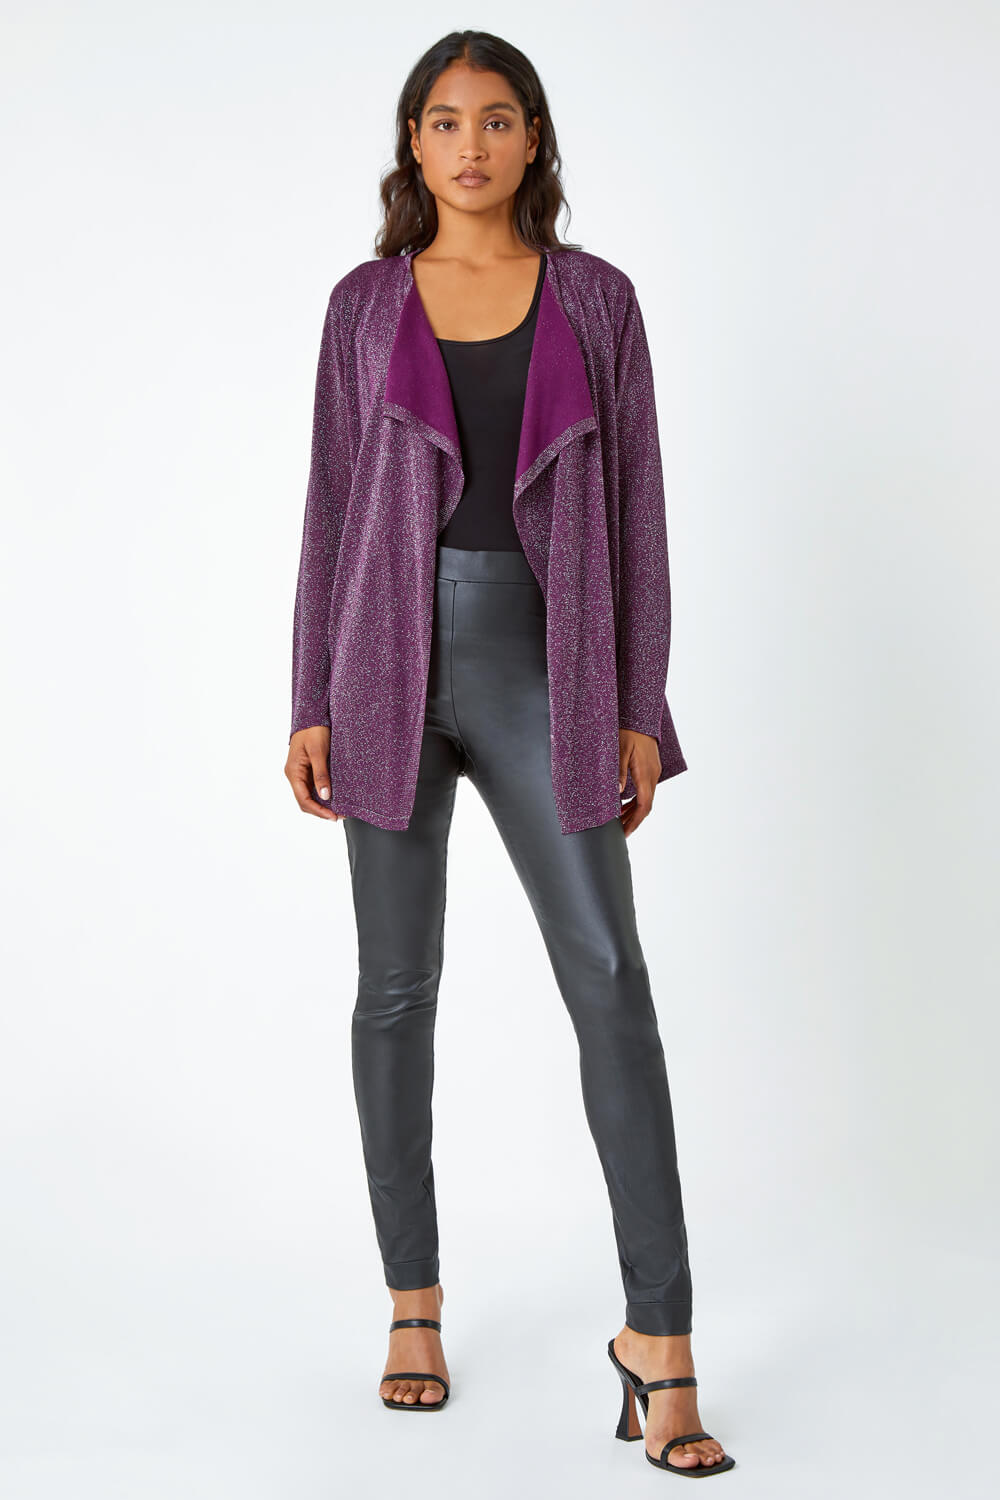 Aubergine Shimmer Waterfall Stretch Cardigan, Image 2 of 5